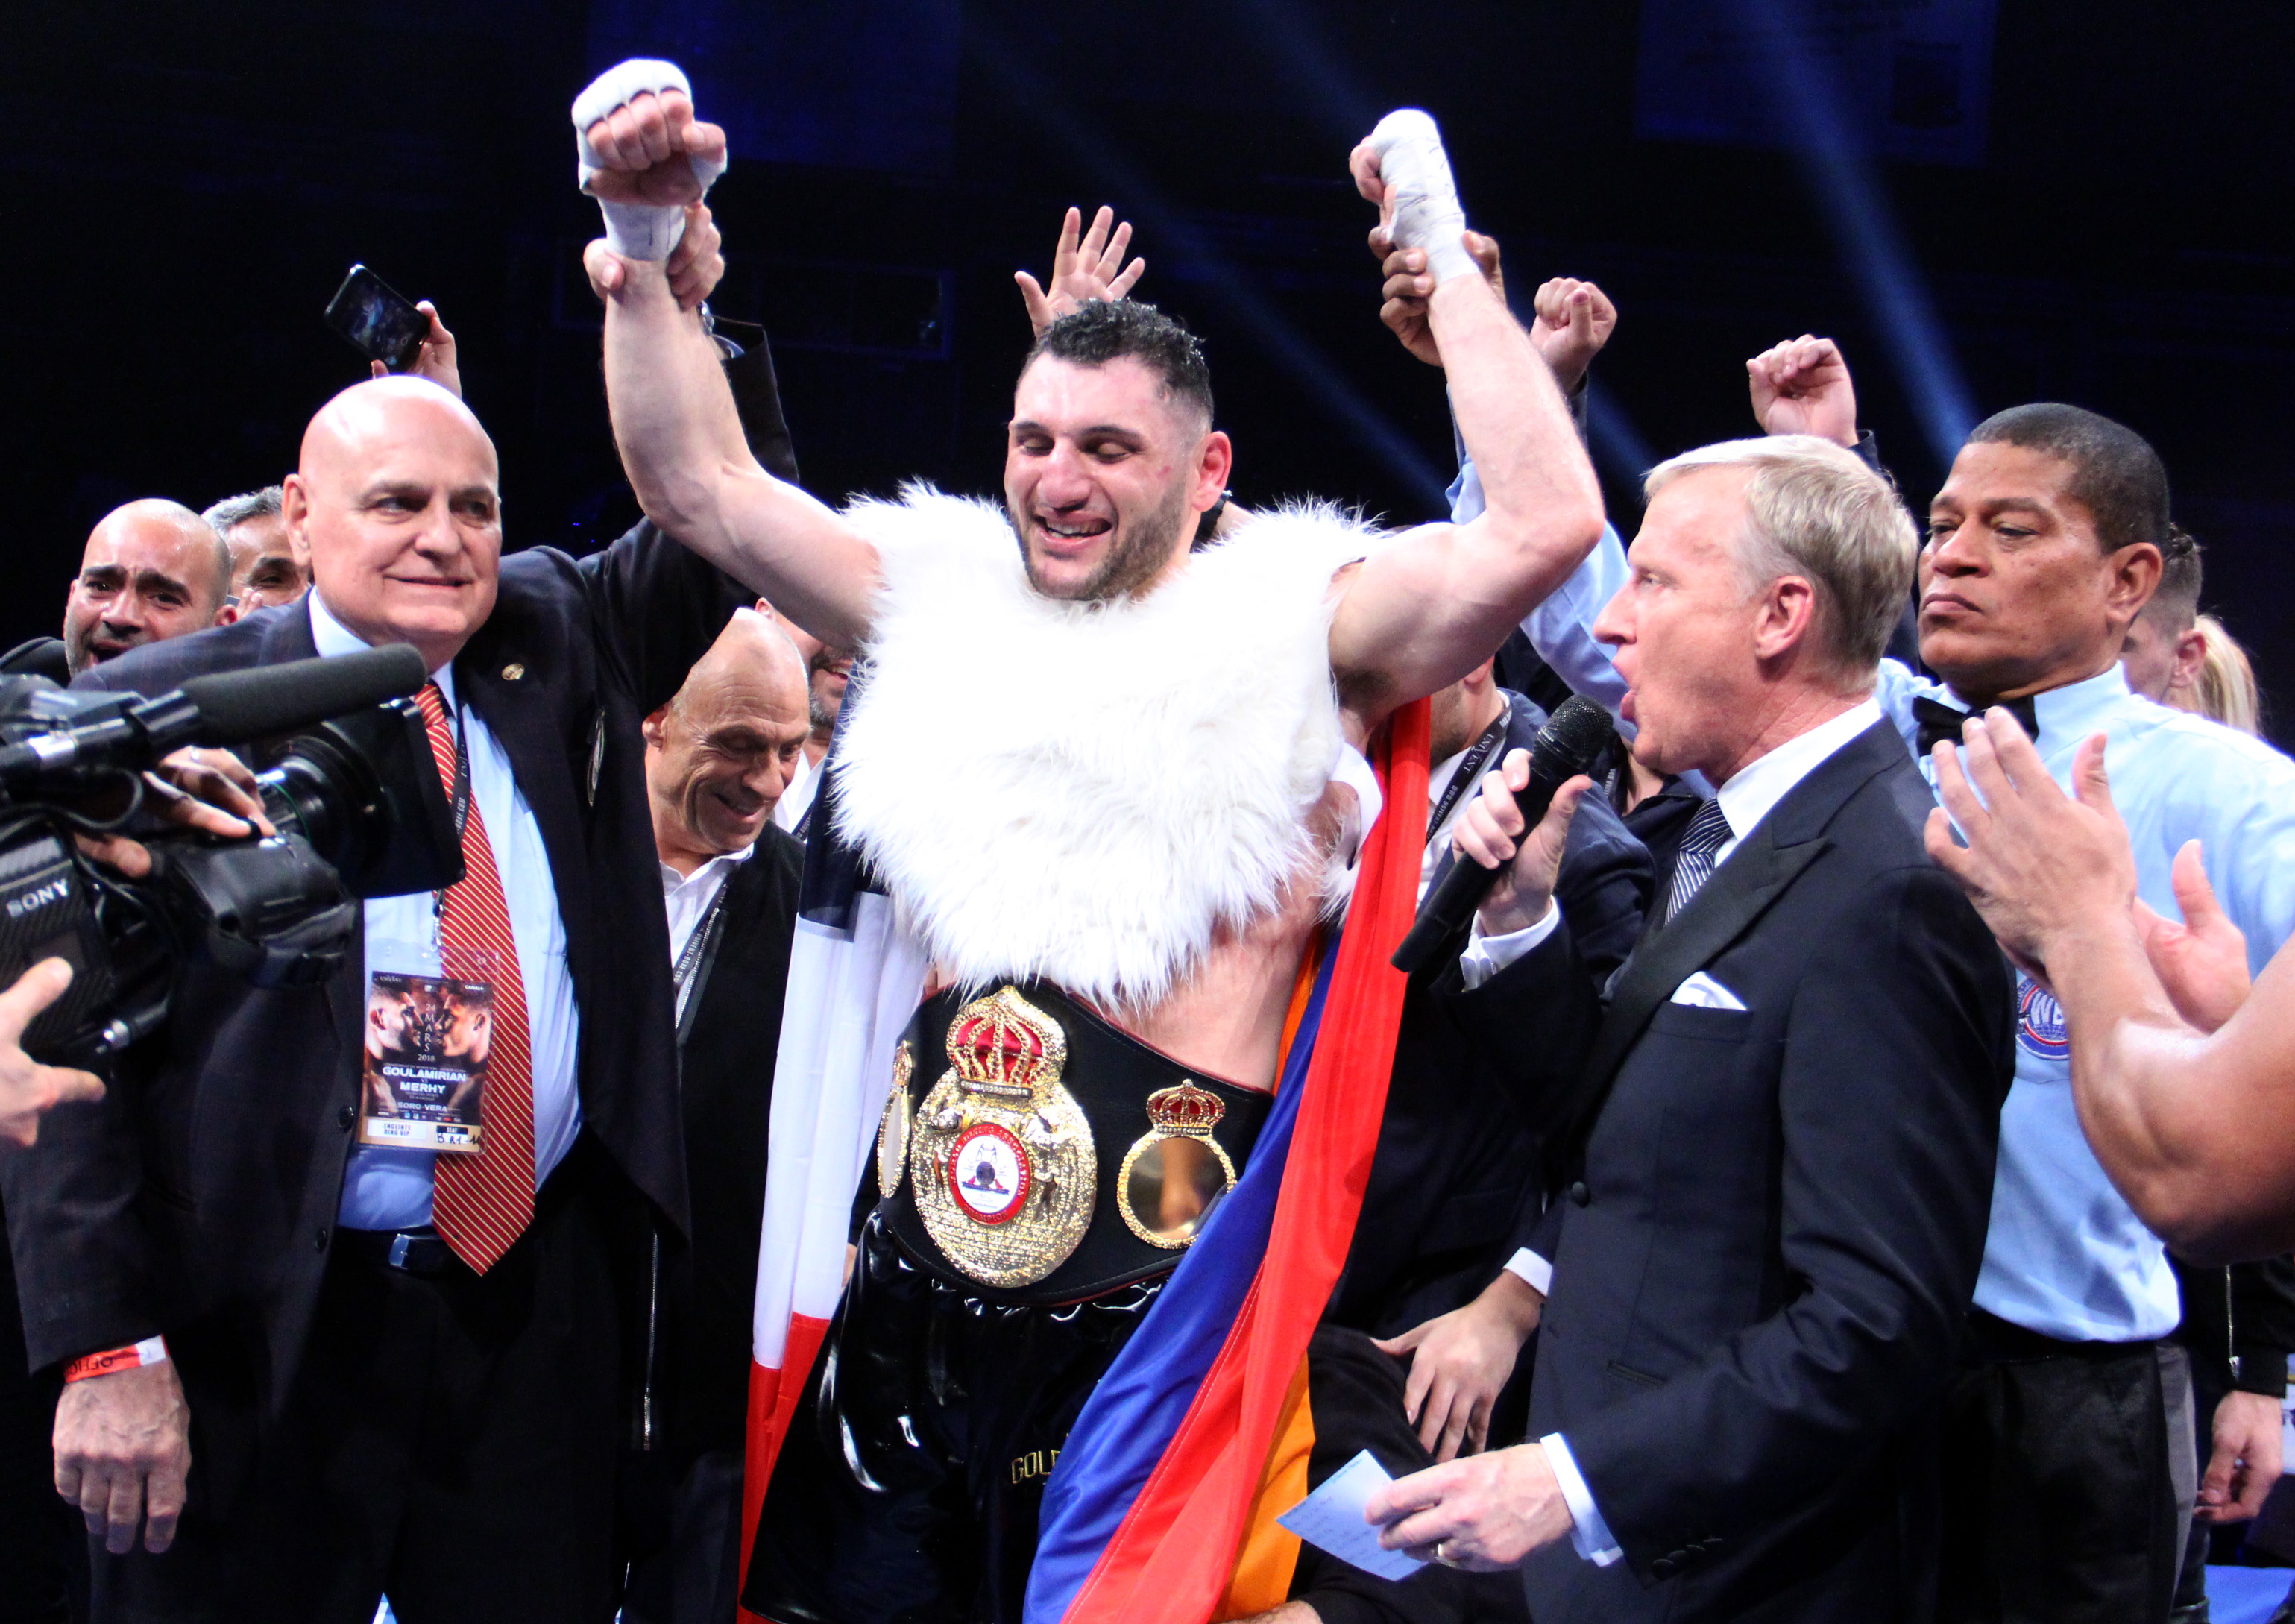 Goulamirian knocked out Merhy and is the new WBA Cruiserweight champion